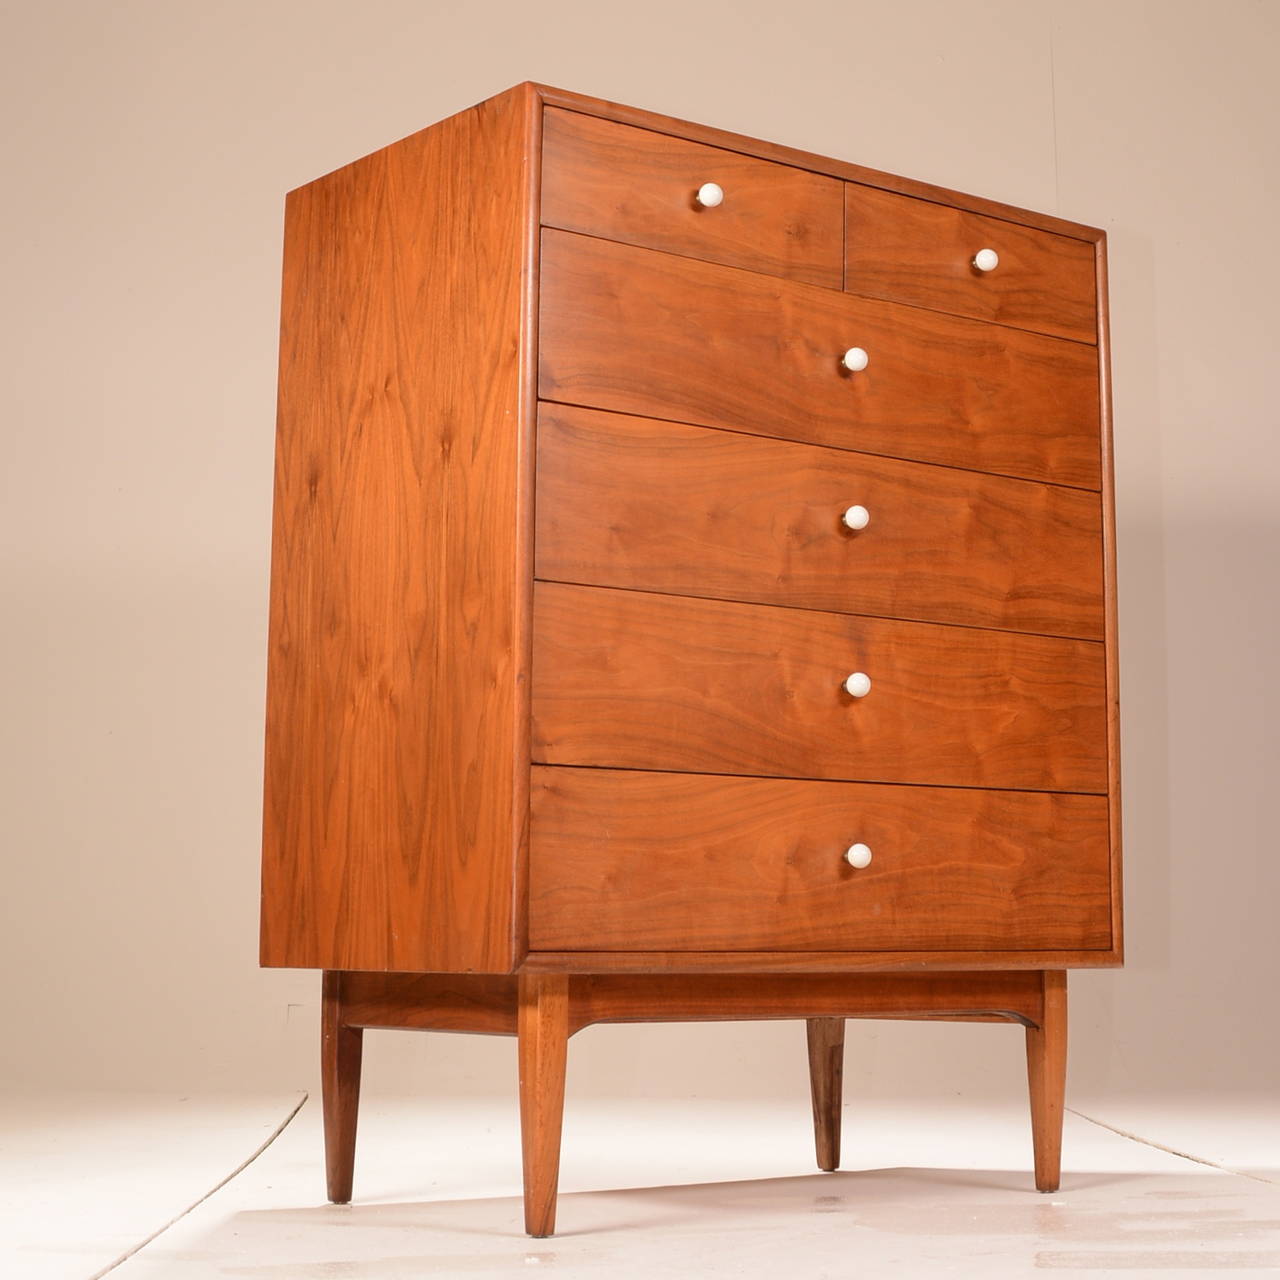 This is a great cabinet designed by Kipp Stewart and Stewart MacDougall for Drexel. Its part of the highly collectable Declaration line of furniture. This piece is in good-great vintage condition with light wear.